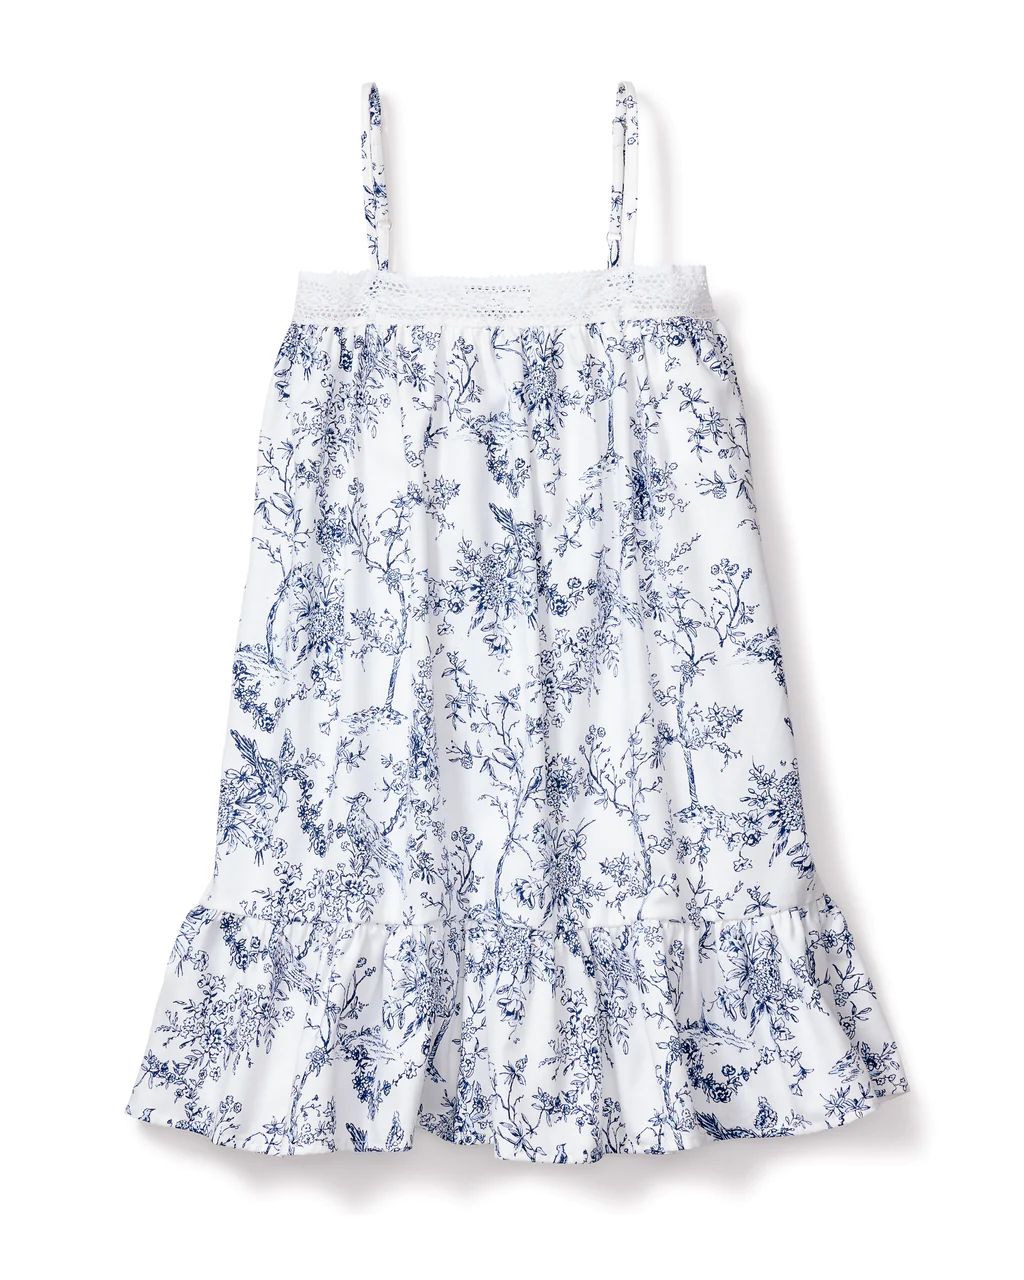 Girl's Twill Lily Nightgown in Timeless Toile | Petite Plume